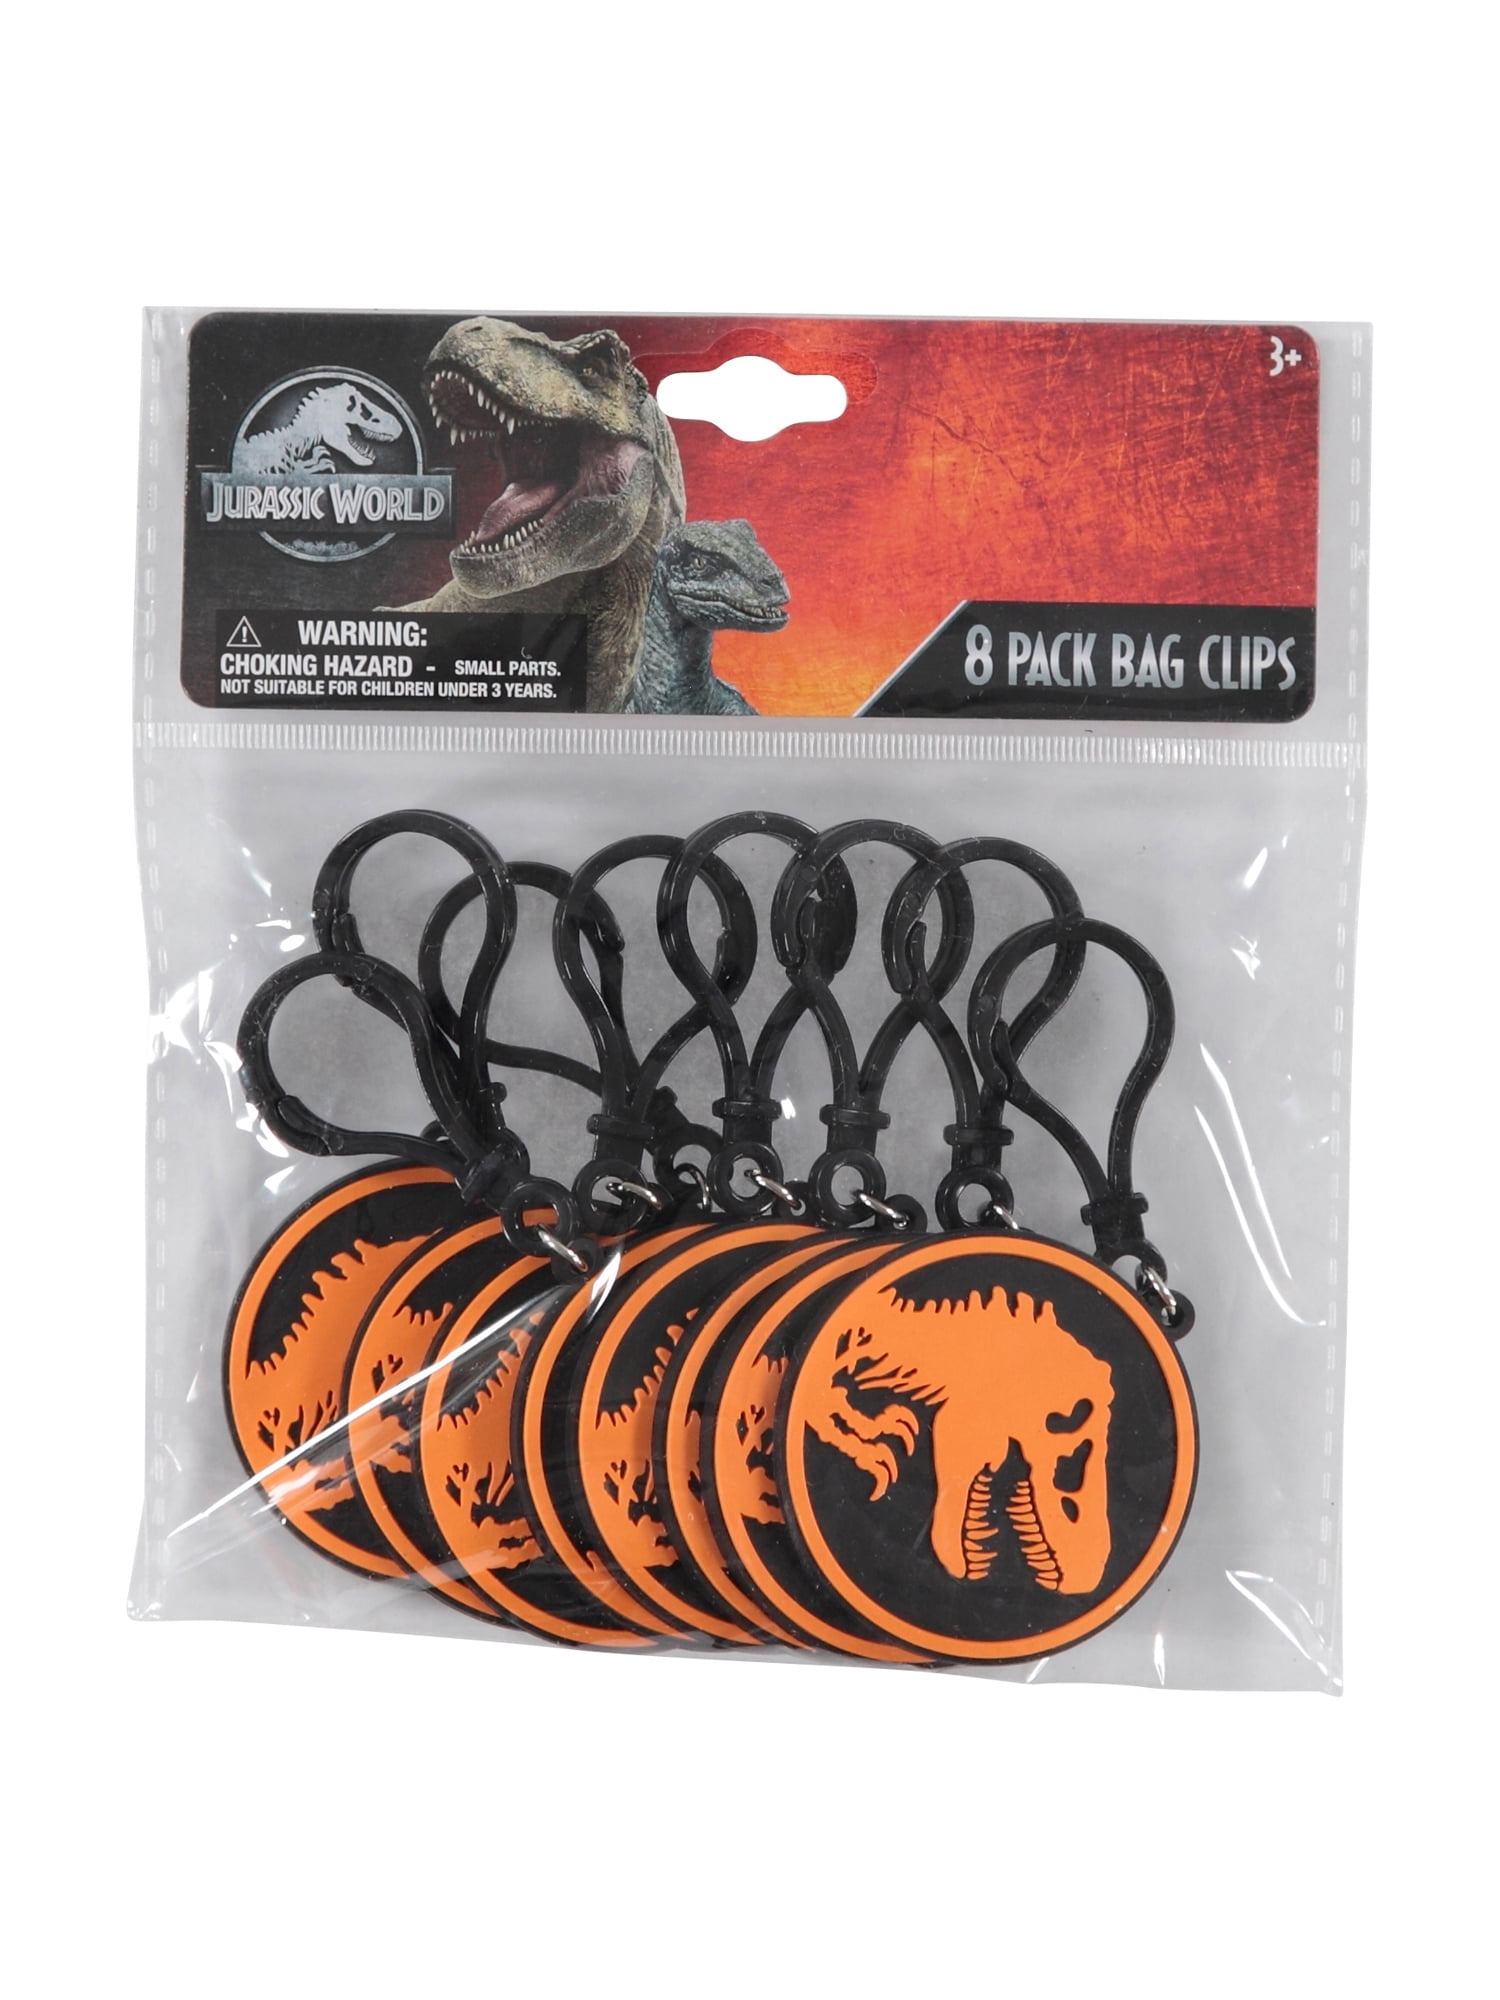 Jurrasic World Rubber Keychains, Party Favor 8 Pack